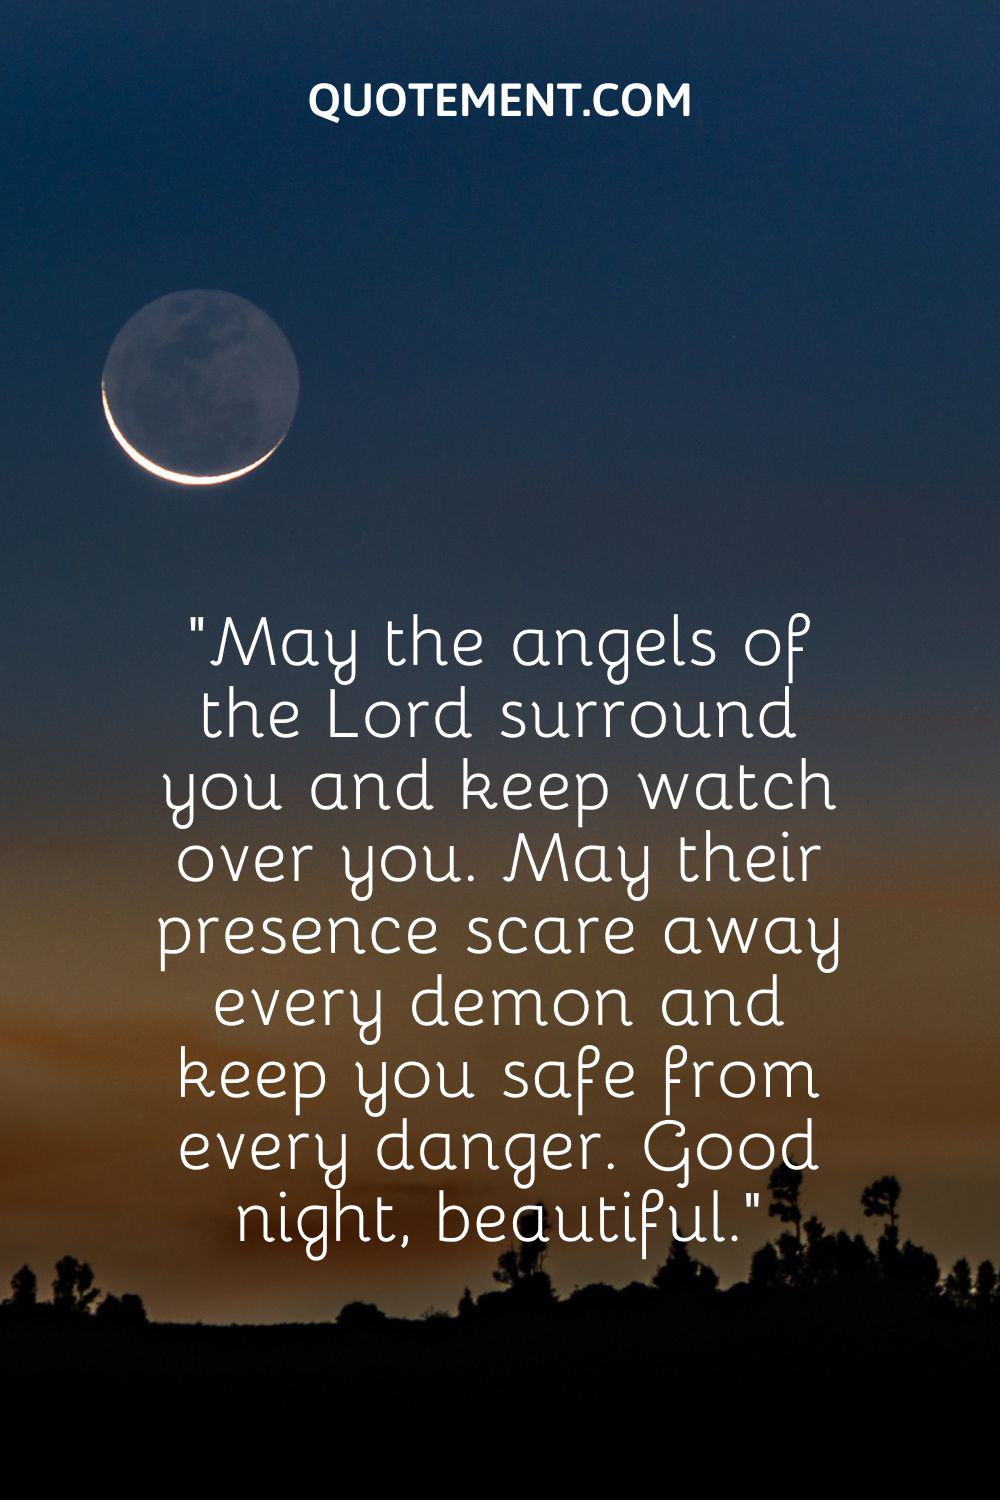 May the angels of the Lord surround you and keep watch over you